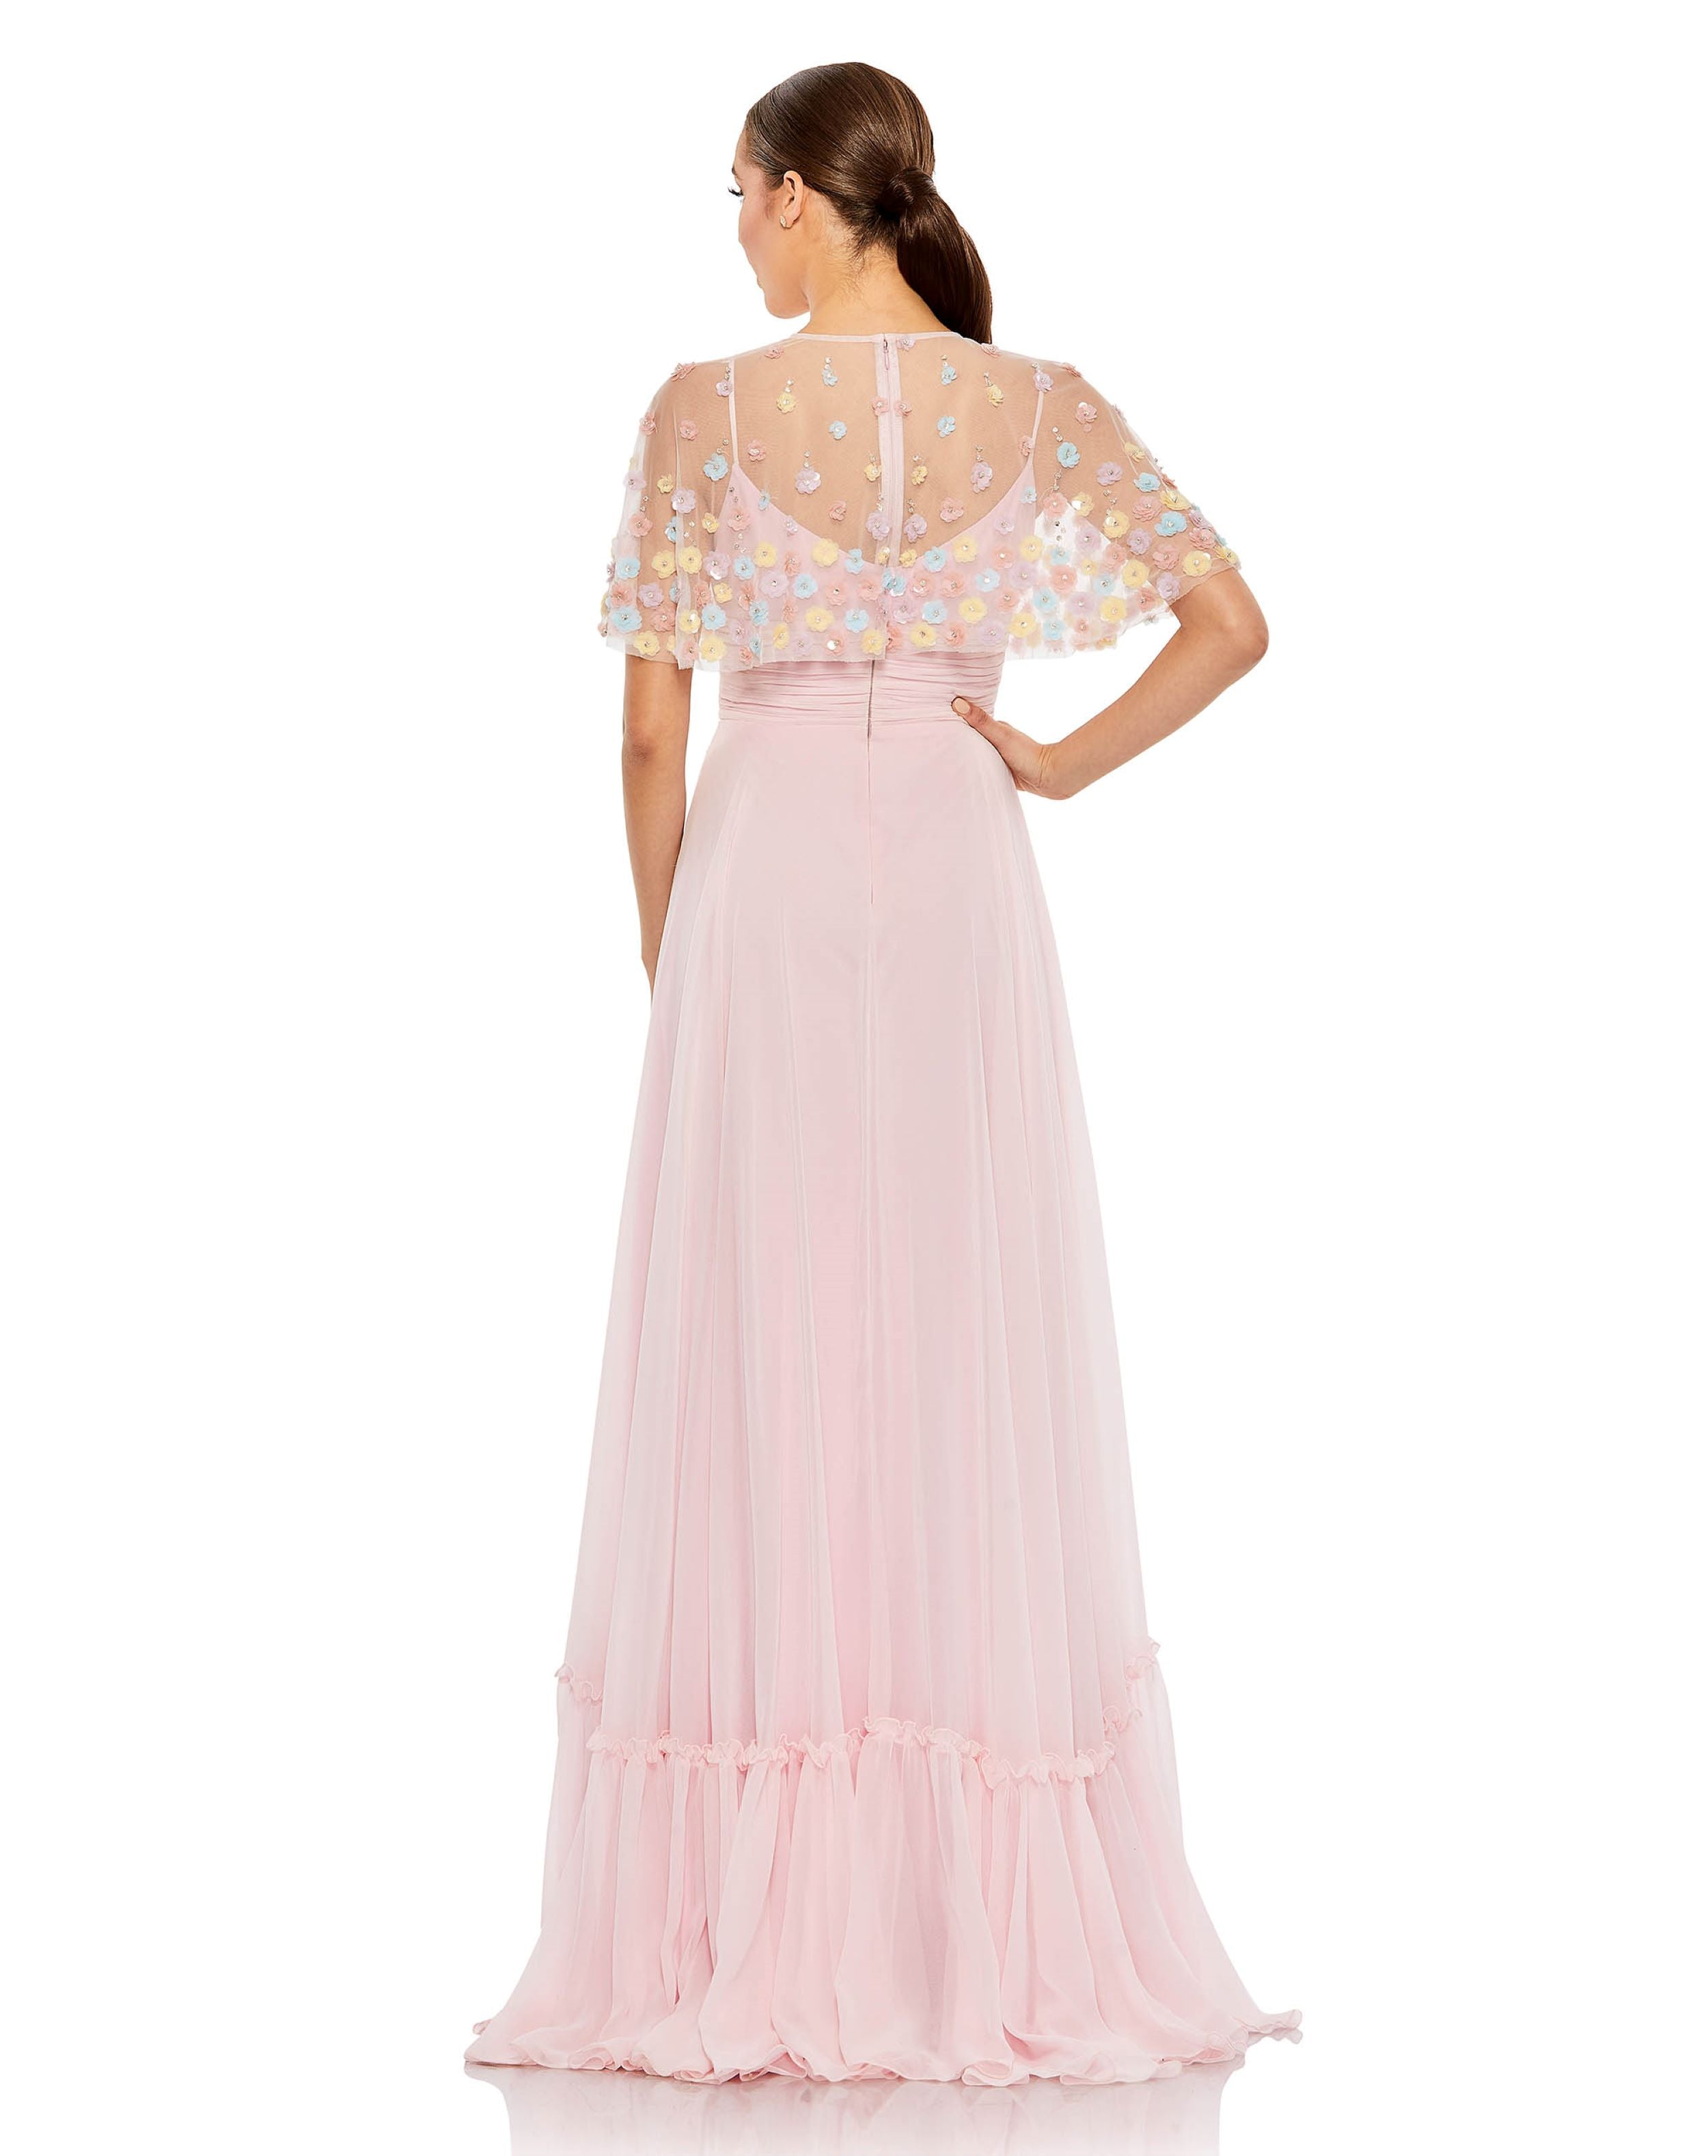 Floral Embellished Illusion Cape Sleeve Gown | Sample | Sz. 2